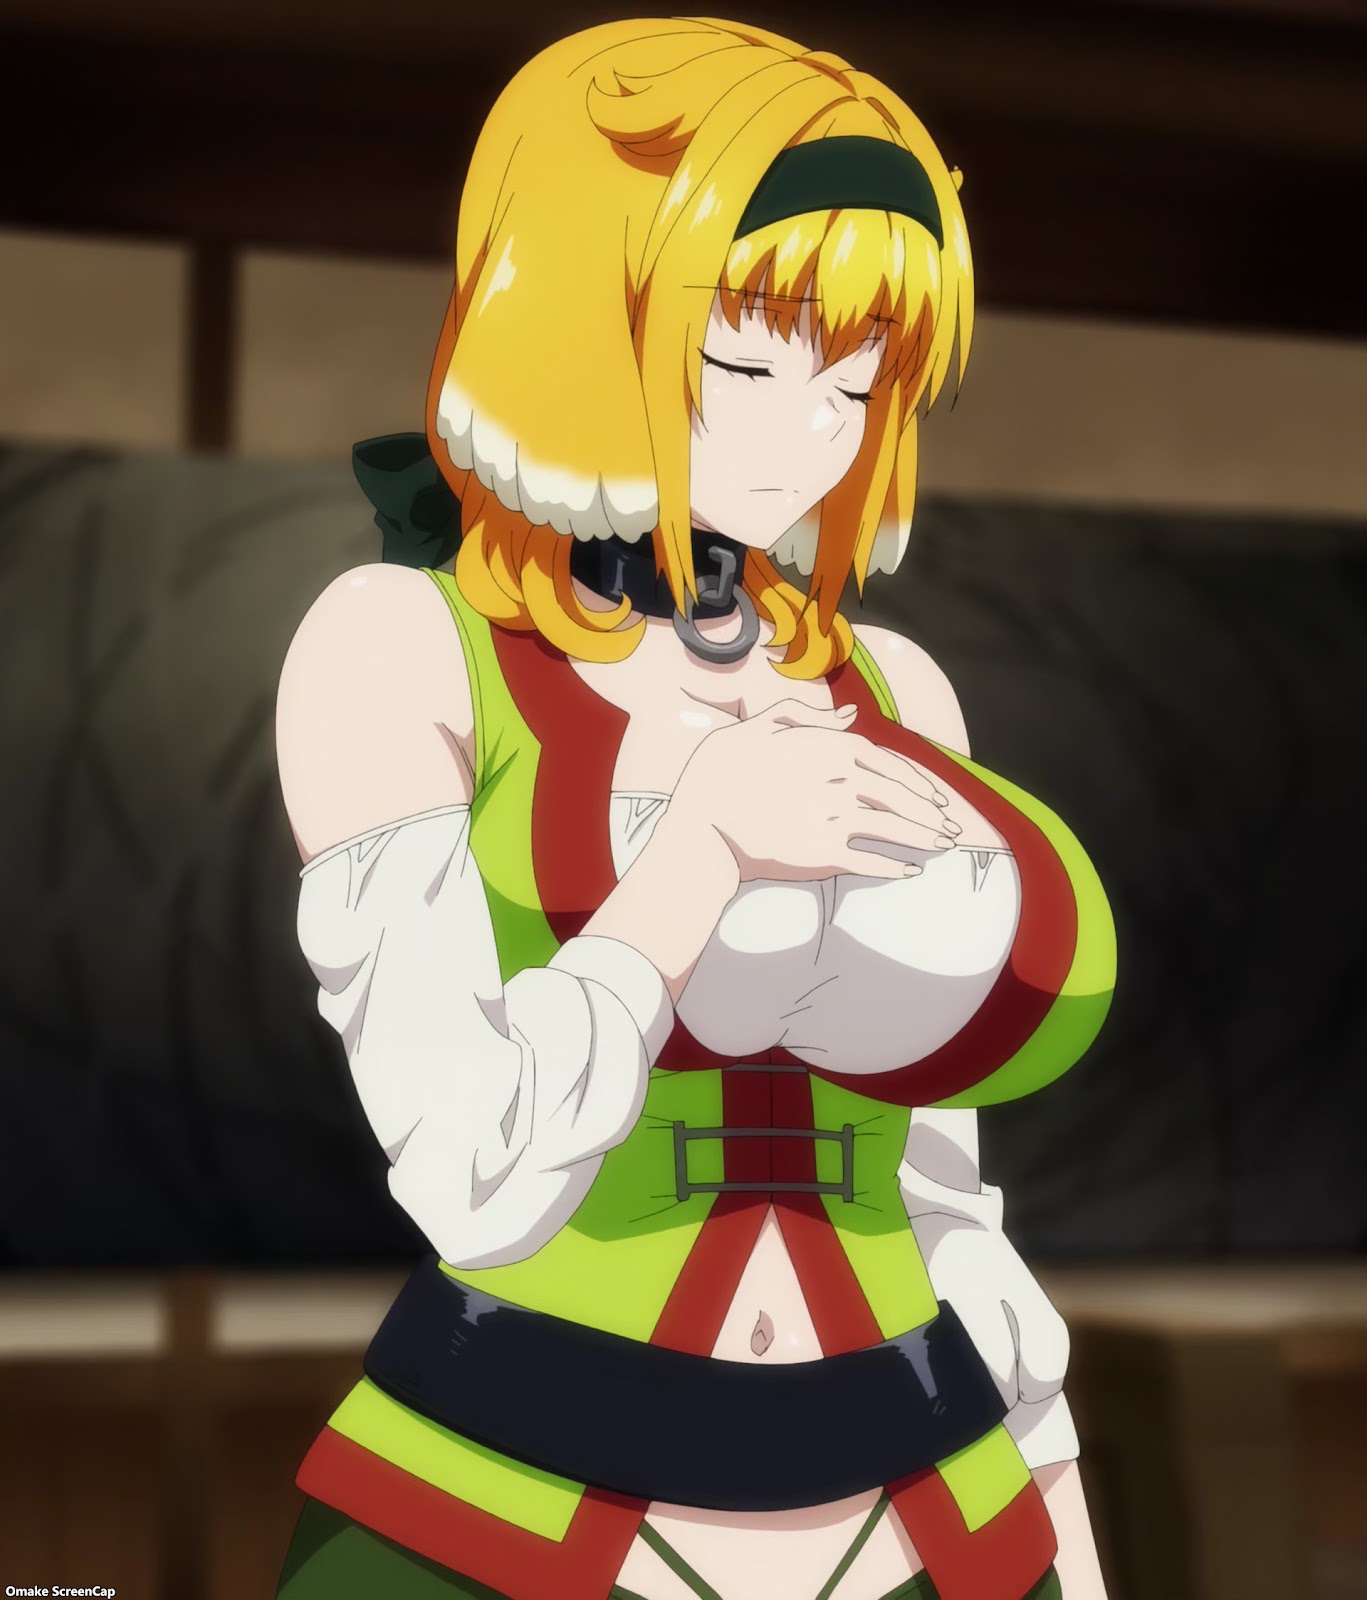 Anime shots - We know what they are doing Sauce: Isekai harem